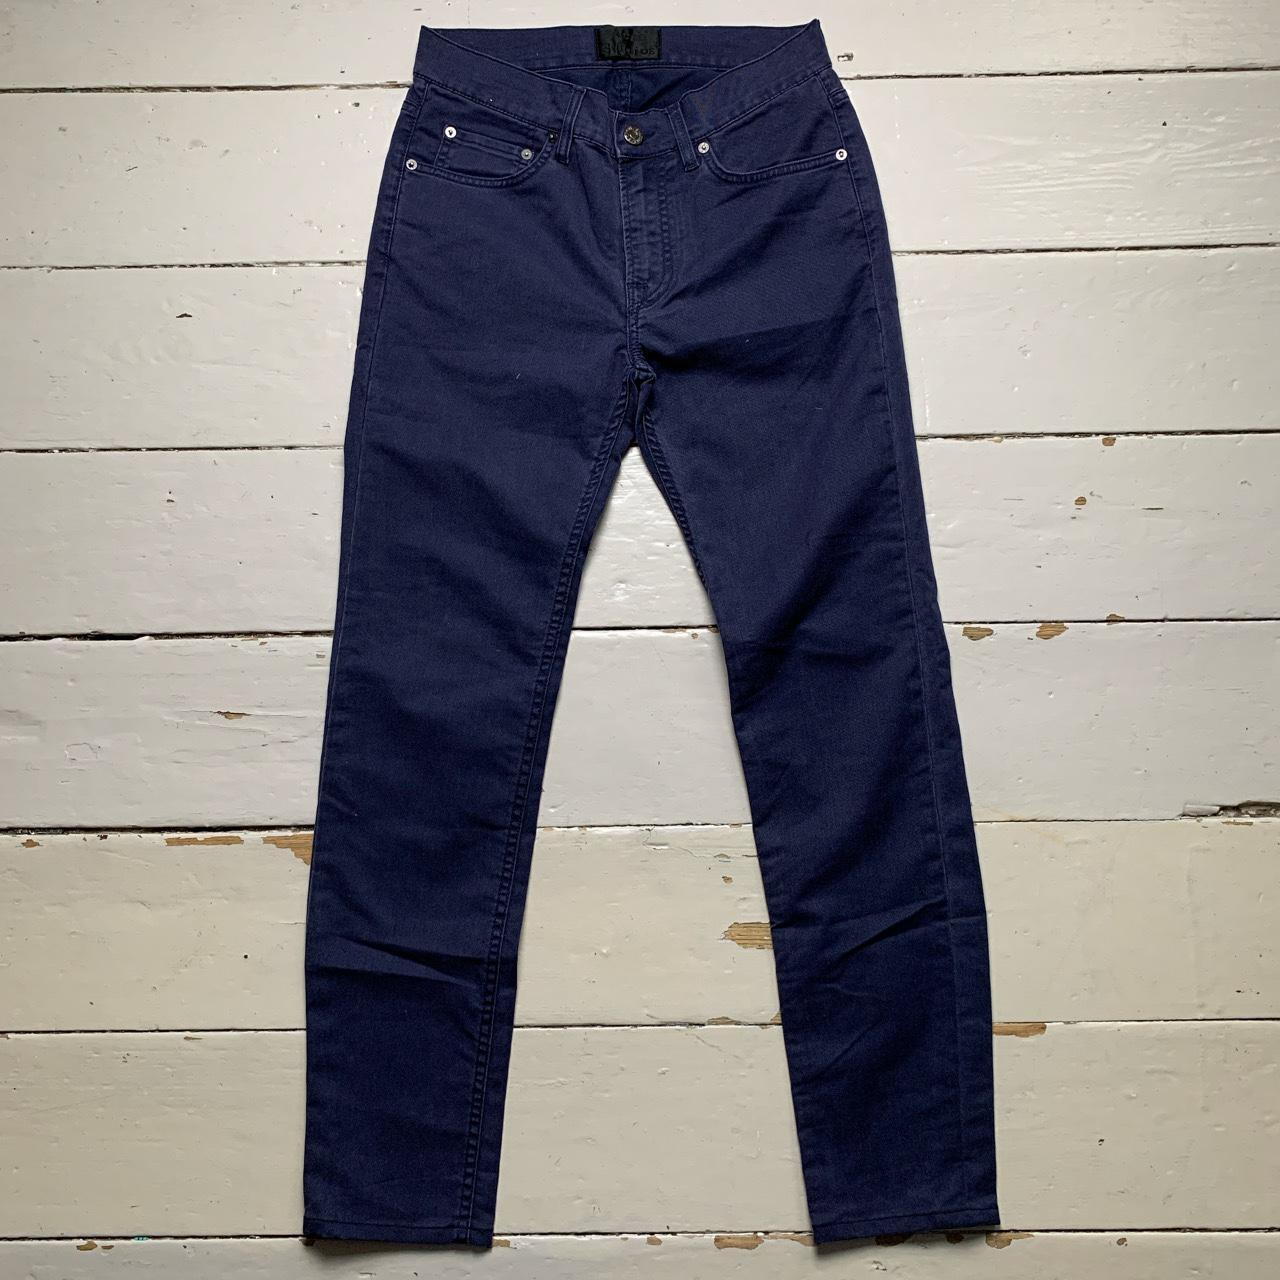 Acne Studios Ace UPS Navy Trousers